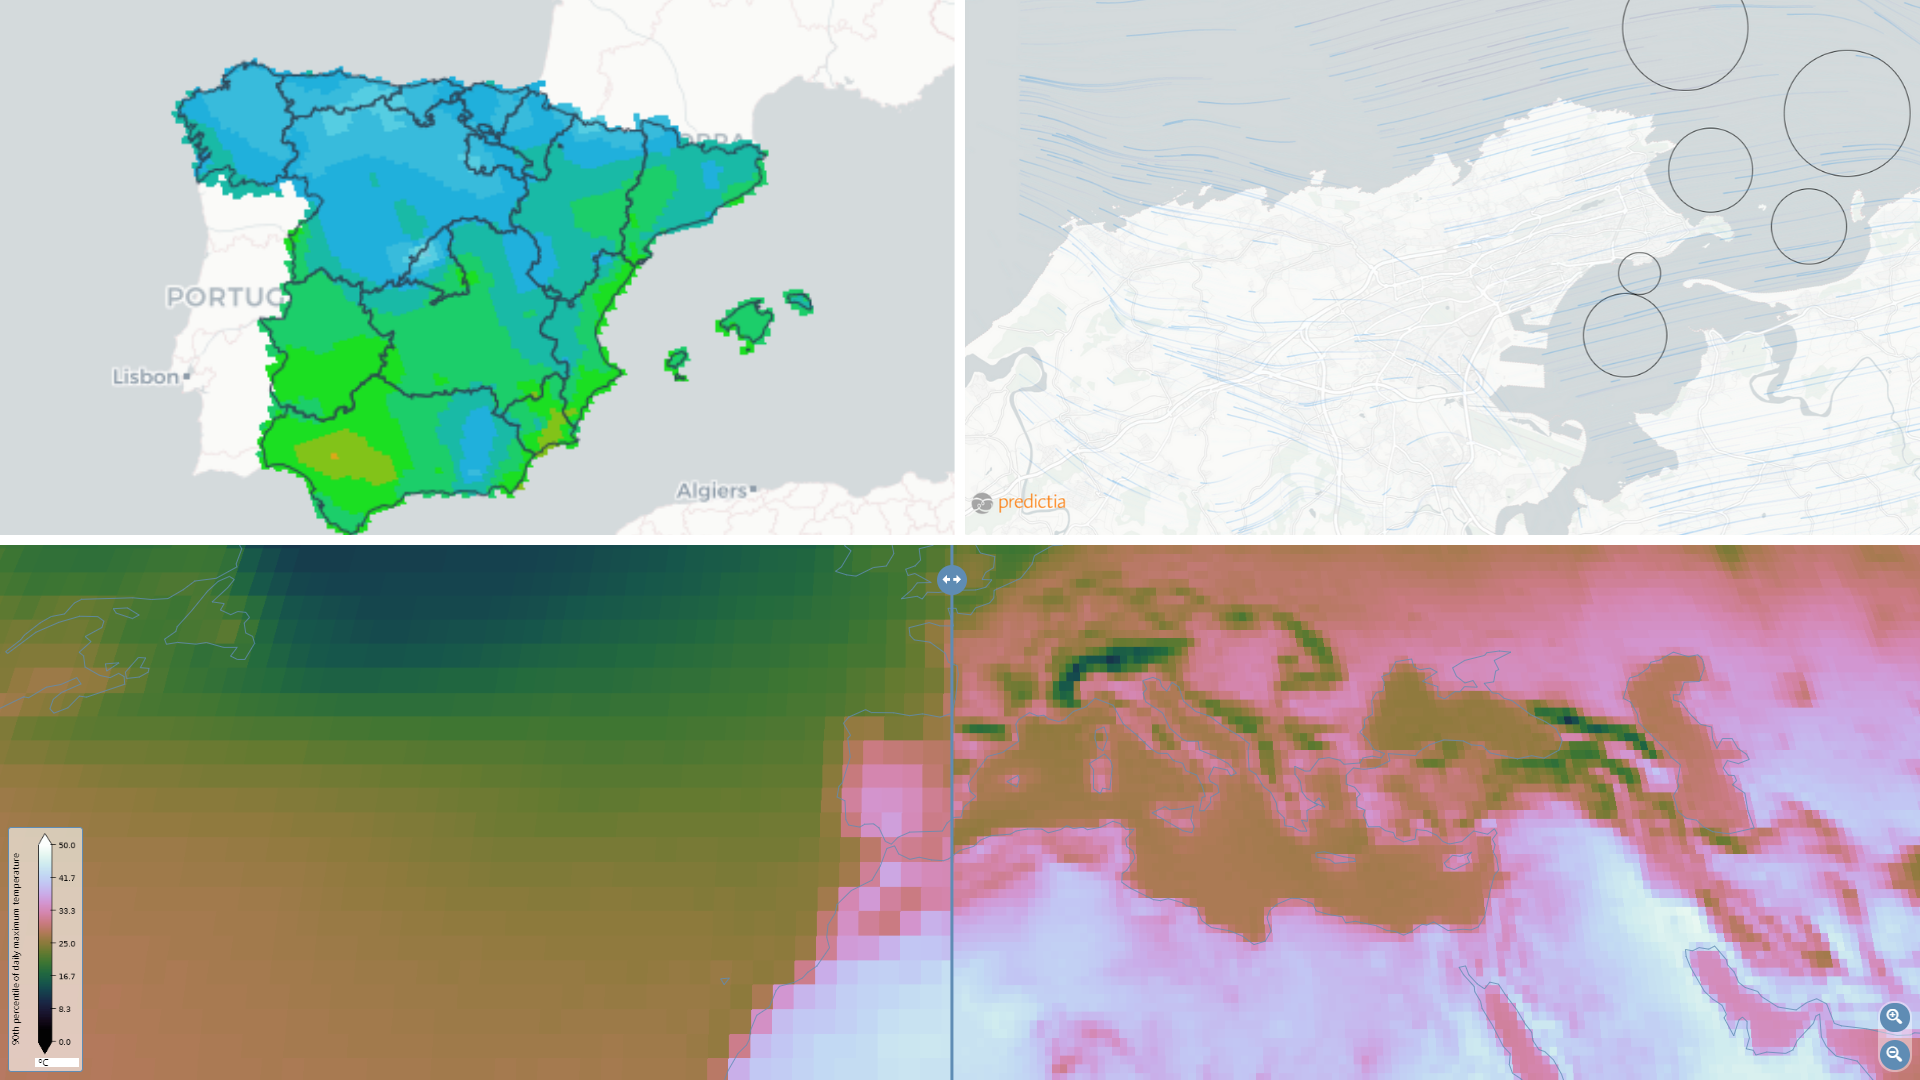 Several examples of climate visualisations using ADAGUC